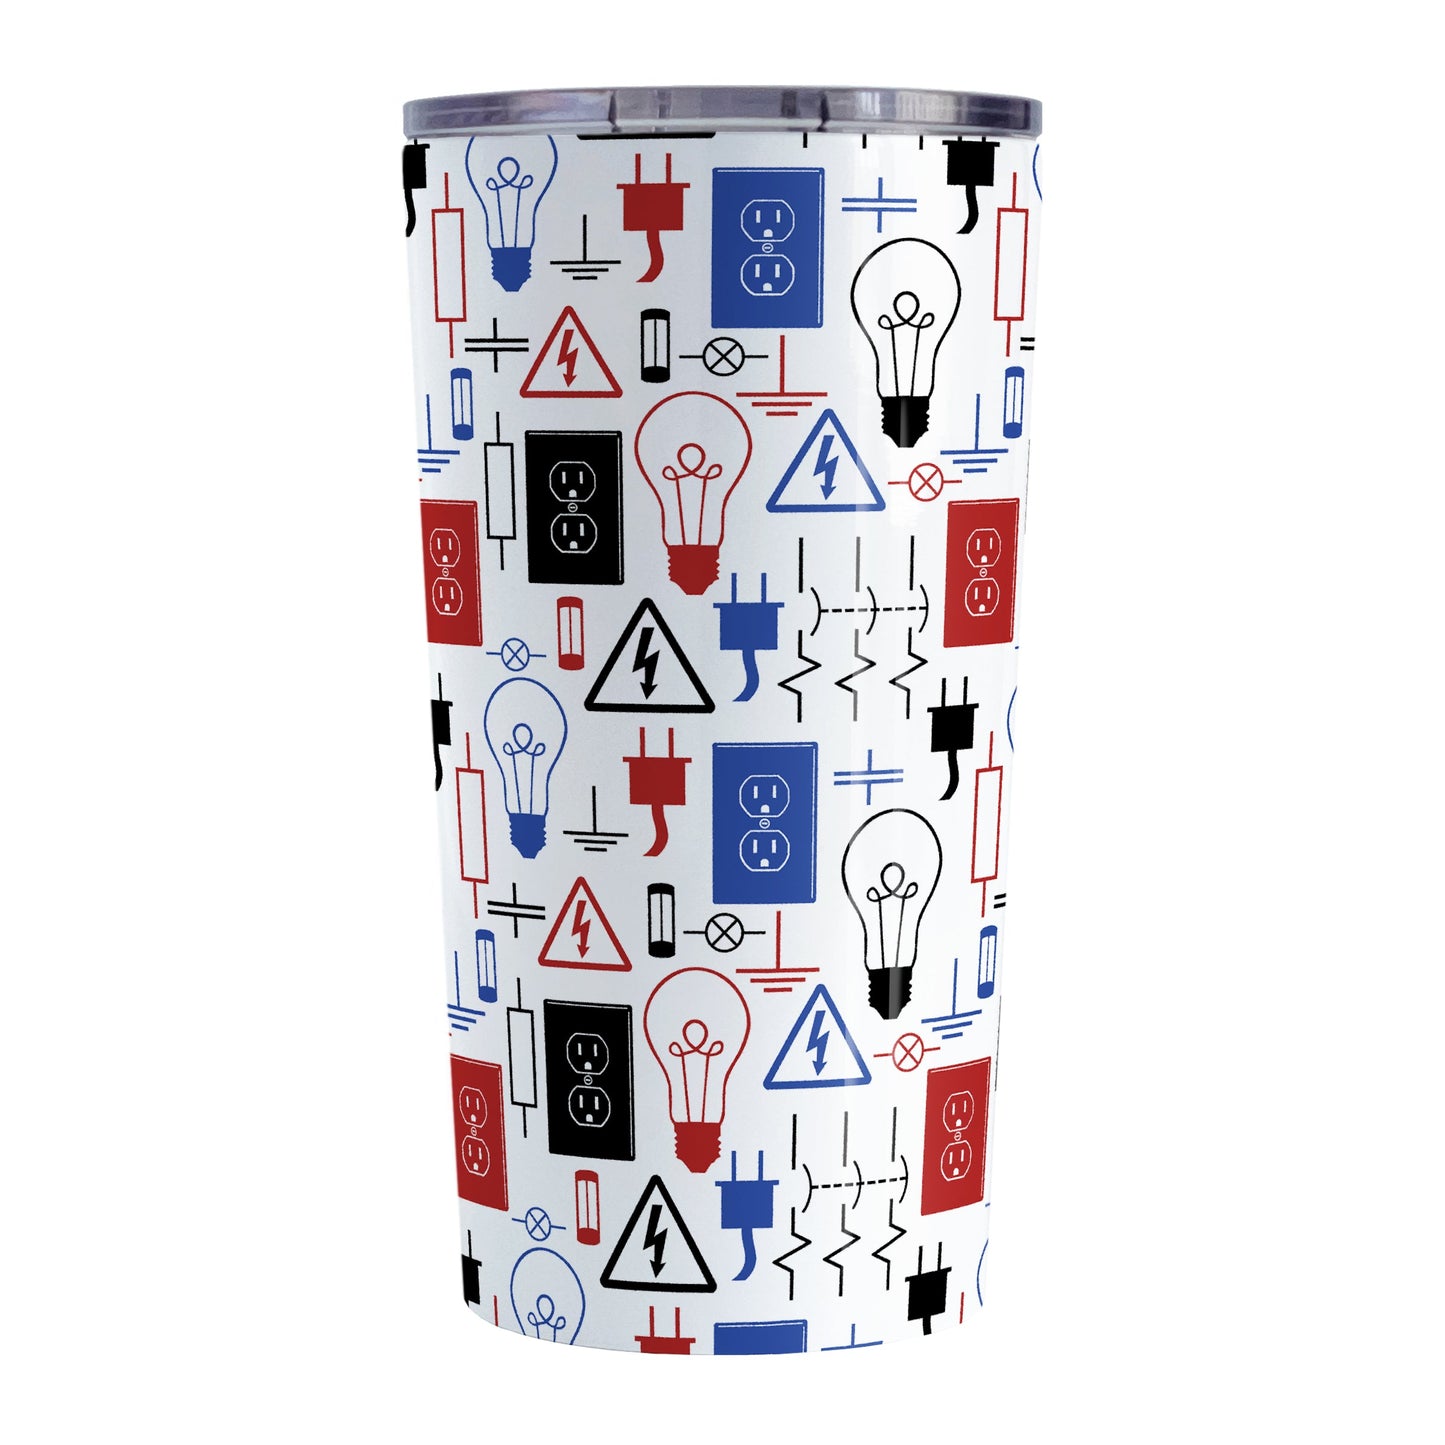 Red Blue Electrical Electrician Tumbler Cup (20oz) at Amy's Coffee Mugs. A stainless steel insulated tumbler cup designed with an electrical pattern with light bulbs, wall sockets, plugs, fuses, and other electricity symbols in red, blue, and black colors that wraps around the cup. This cup is perfect for people who work a trade as an electrician, love working with electronics, and working in electrical engineering. 